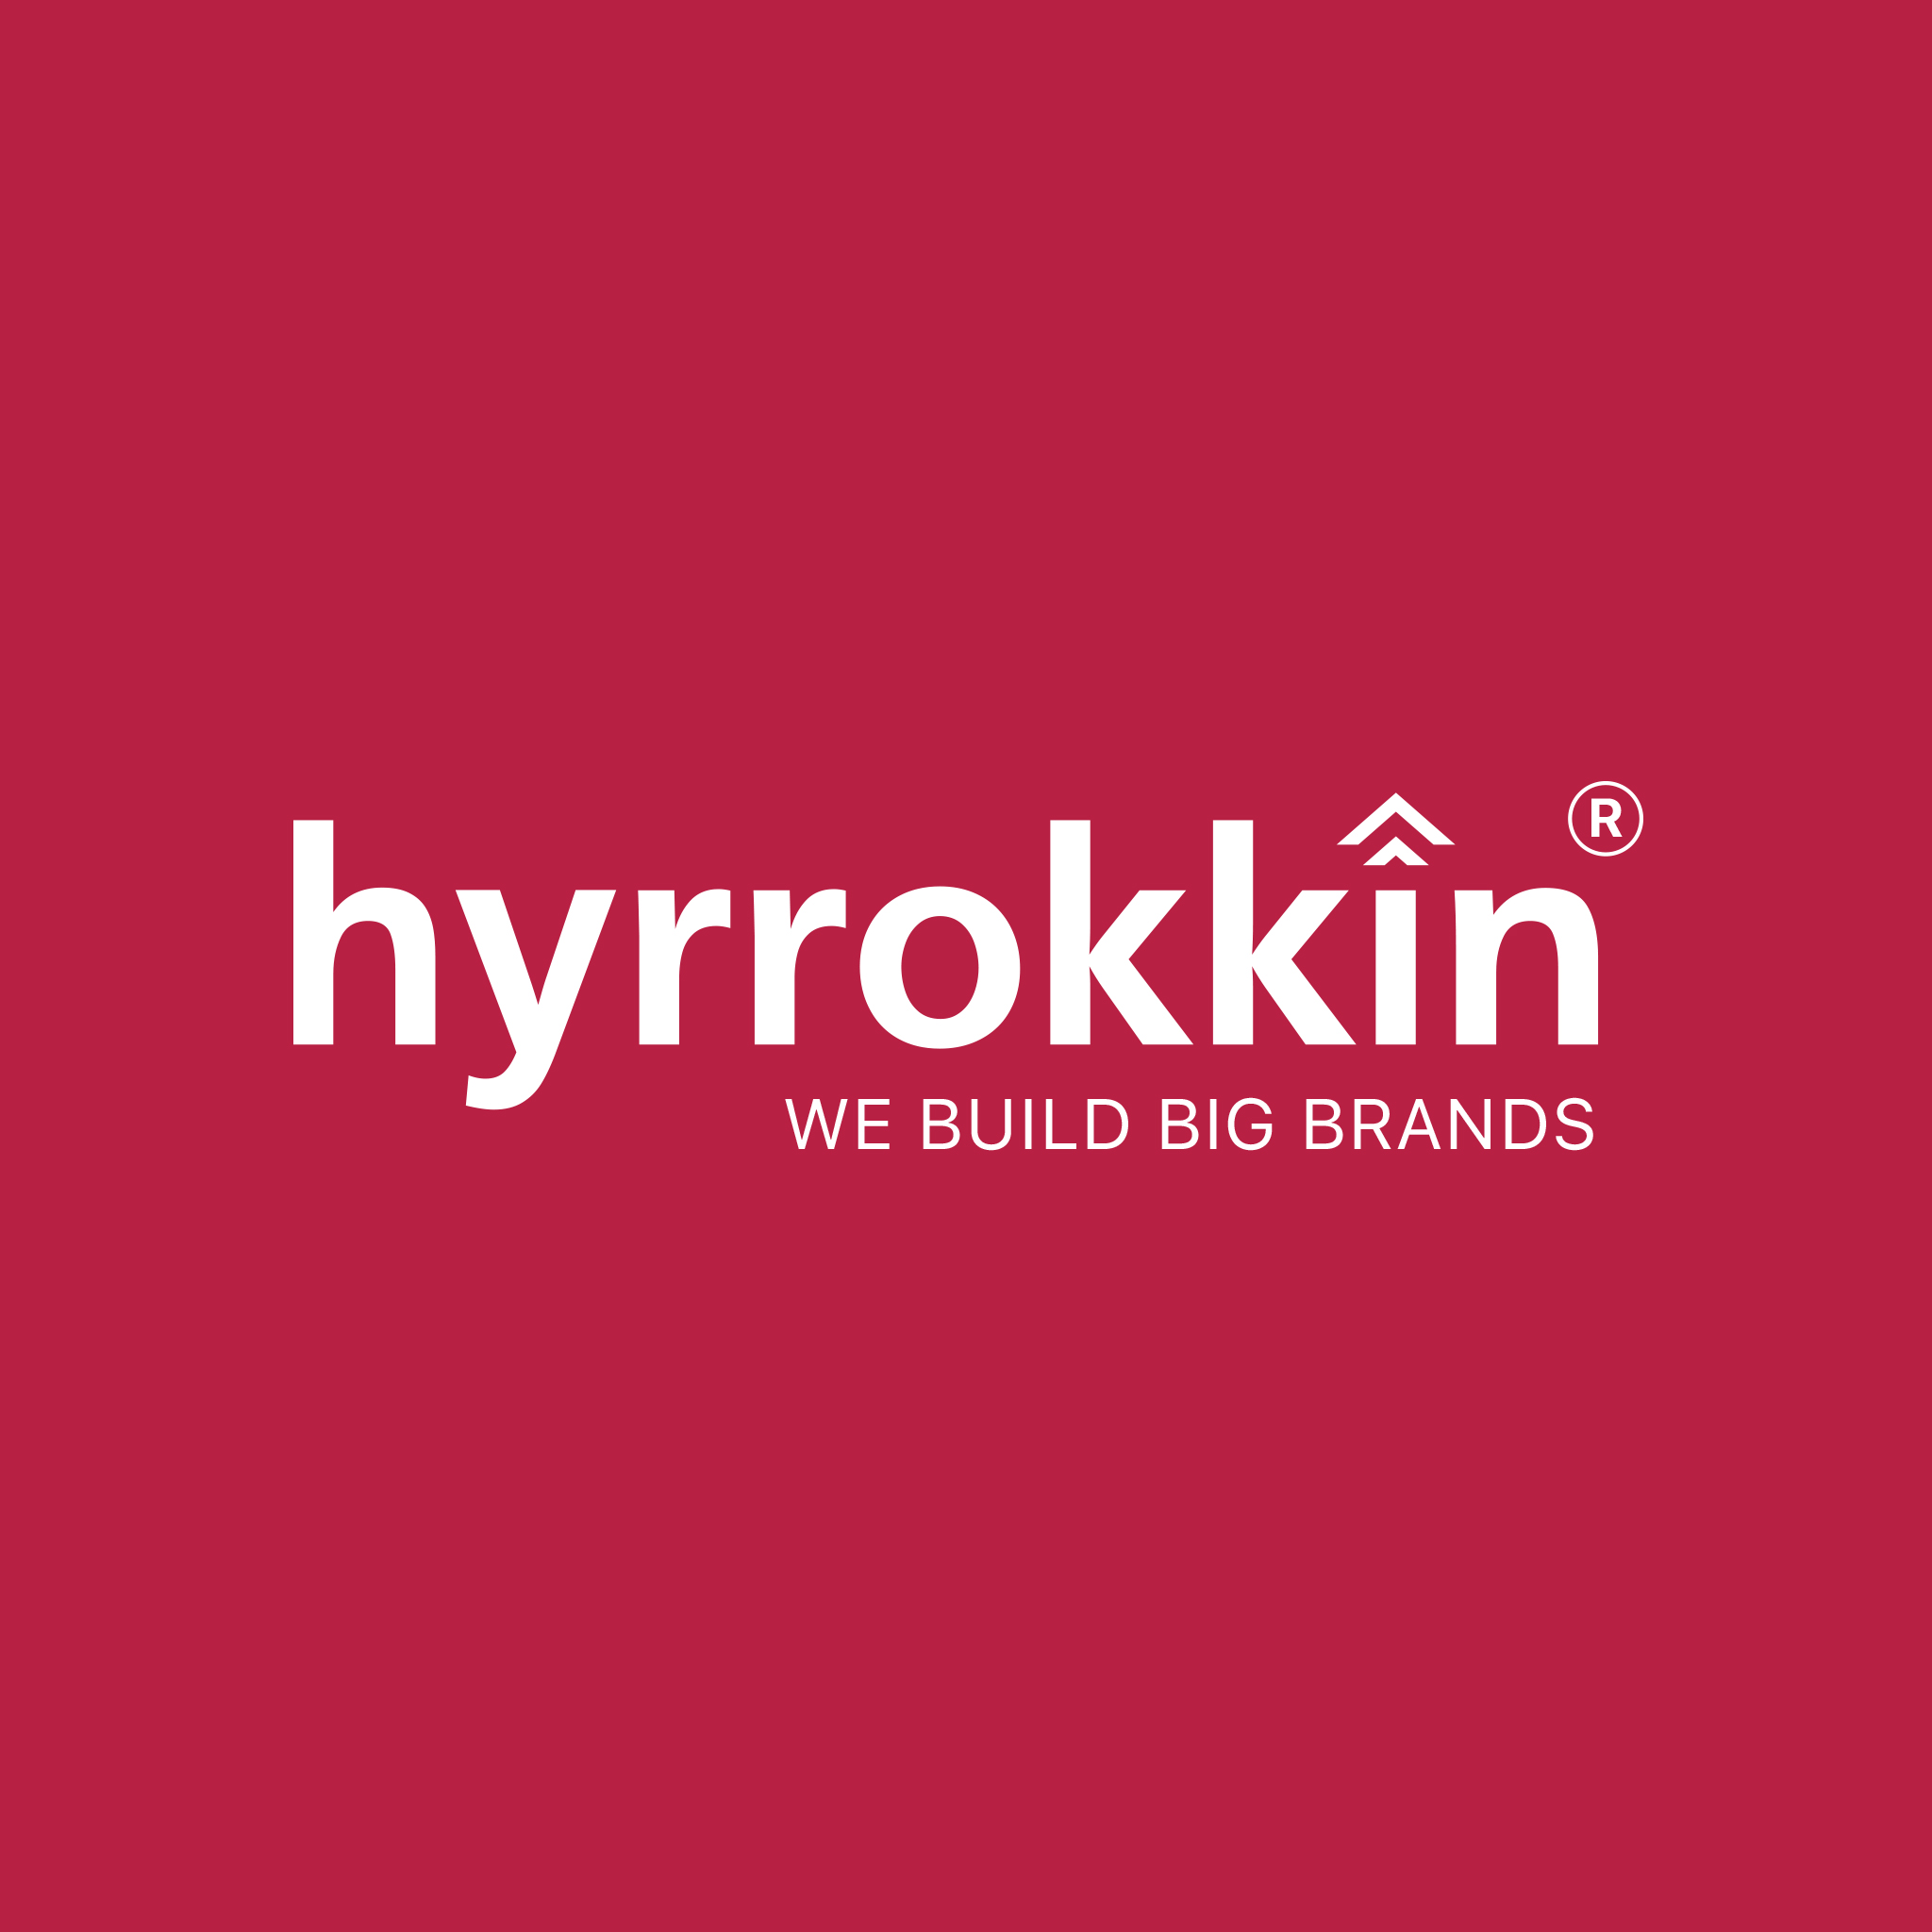 Ethical Web Designing Company is Hyrrokkin